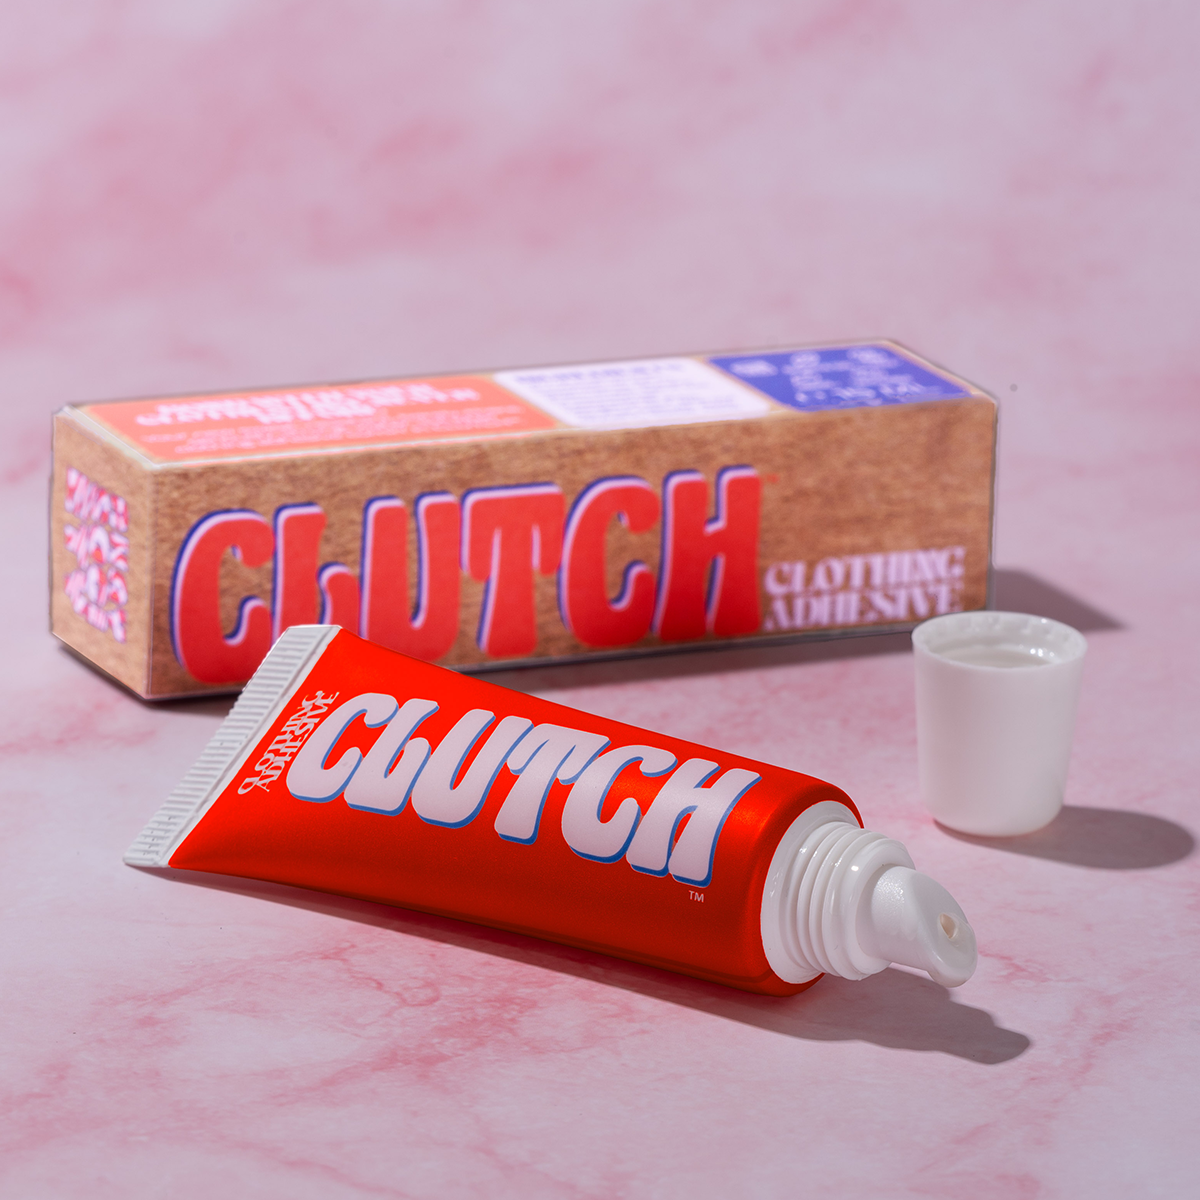 Modern new approach to fashion tape and hollywood tape, clutch glue clothing adhesive applies as much or as little glue to your skin as you need to hold your clothes in place